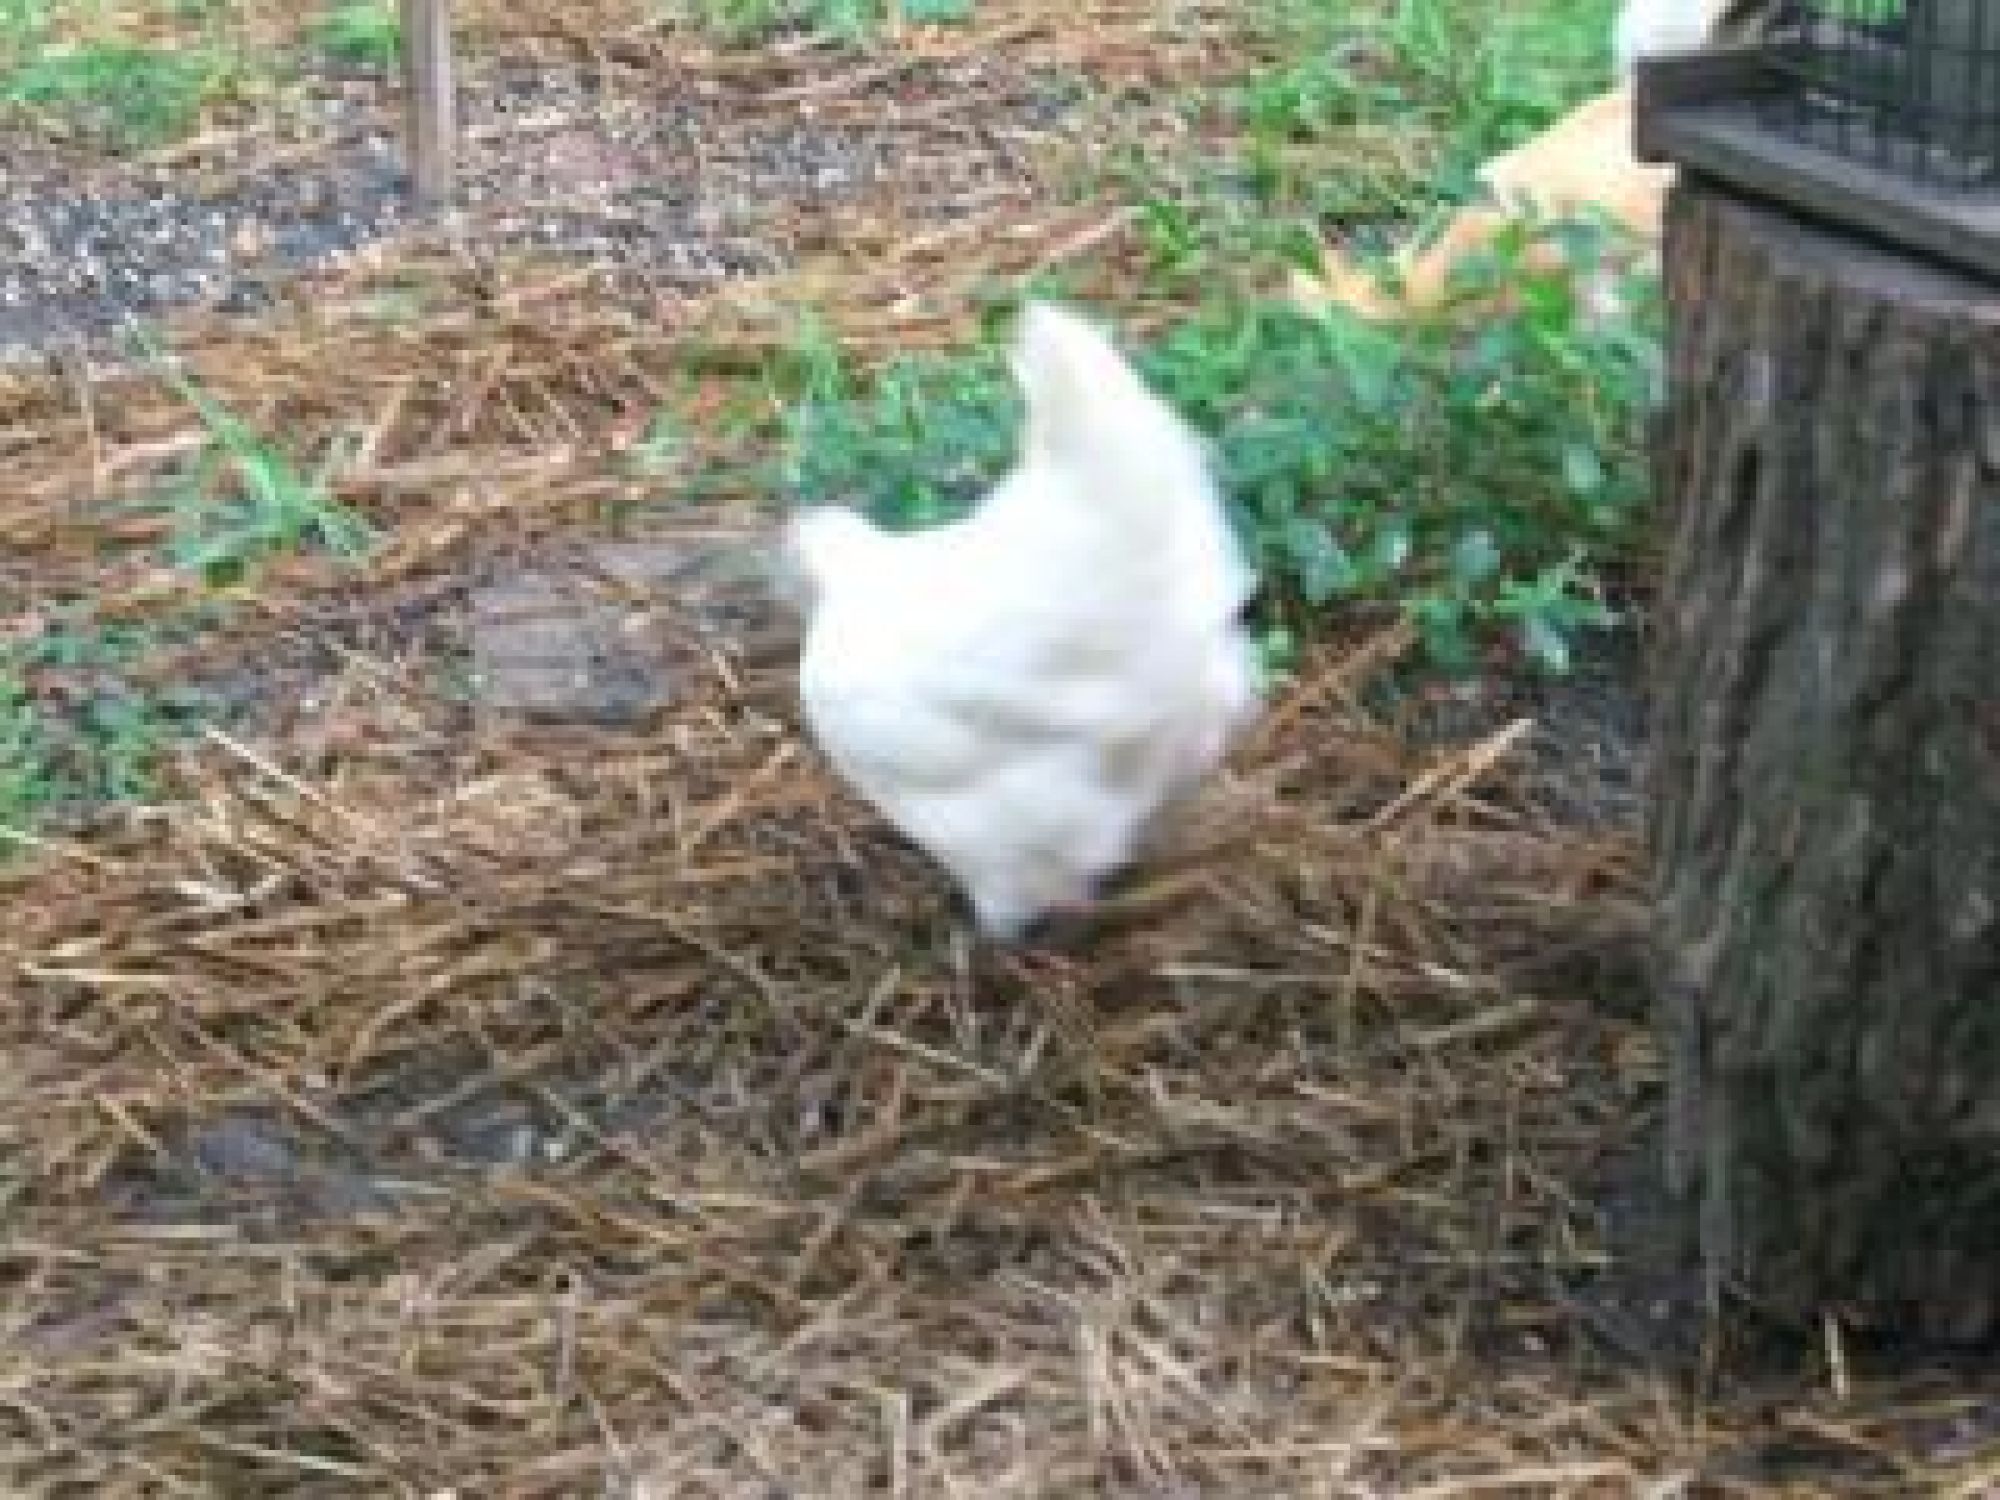 Same two white young hens exploring very close to the woods.  I went down and shooed them back home.